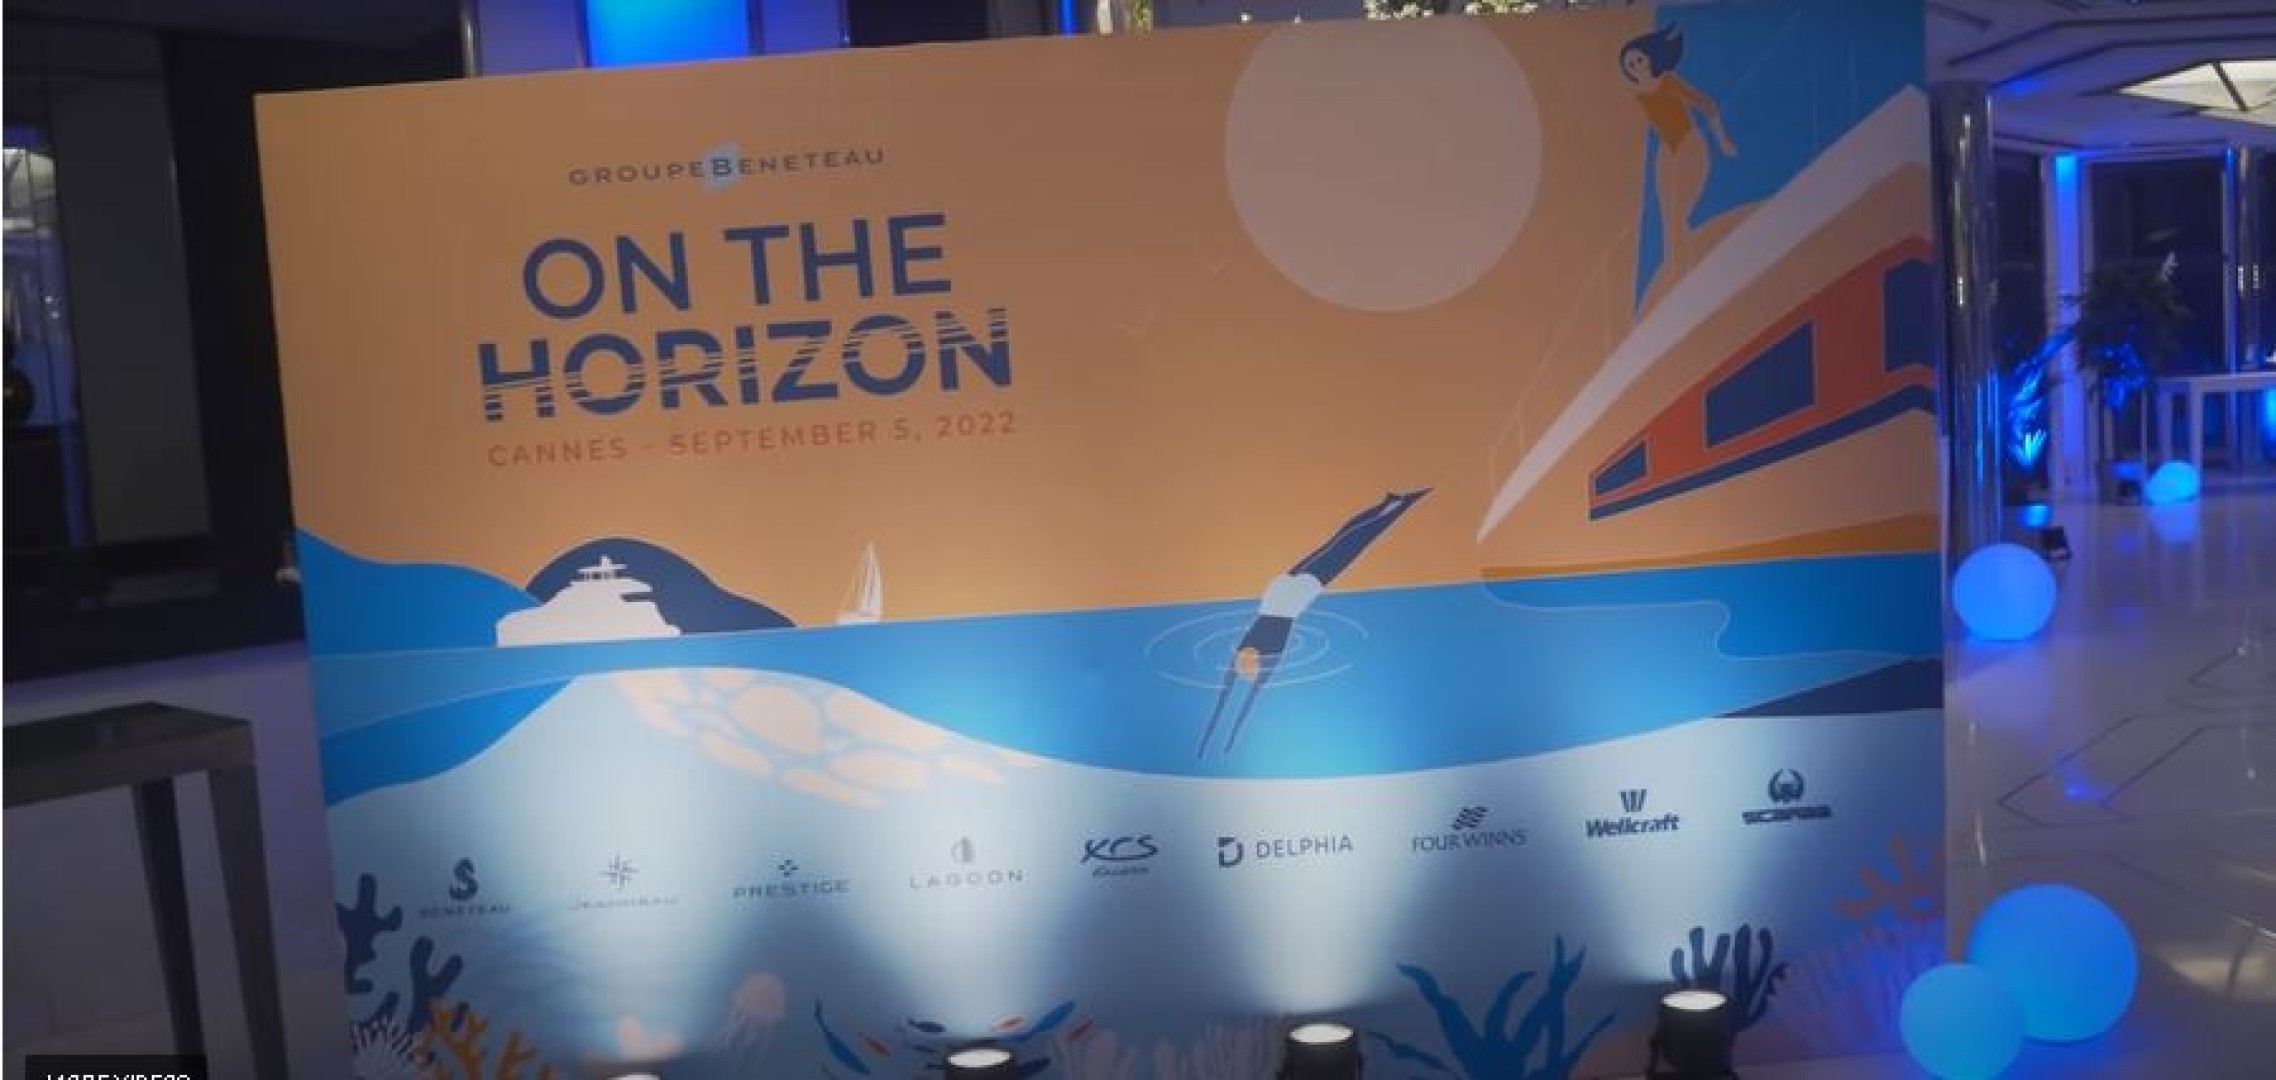 Groupe Beneteau at the Cannes Yachting Festival: On the Horizon 2022